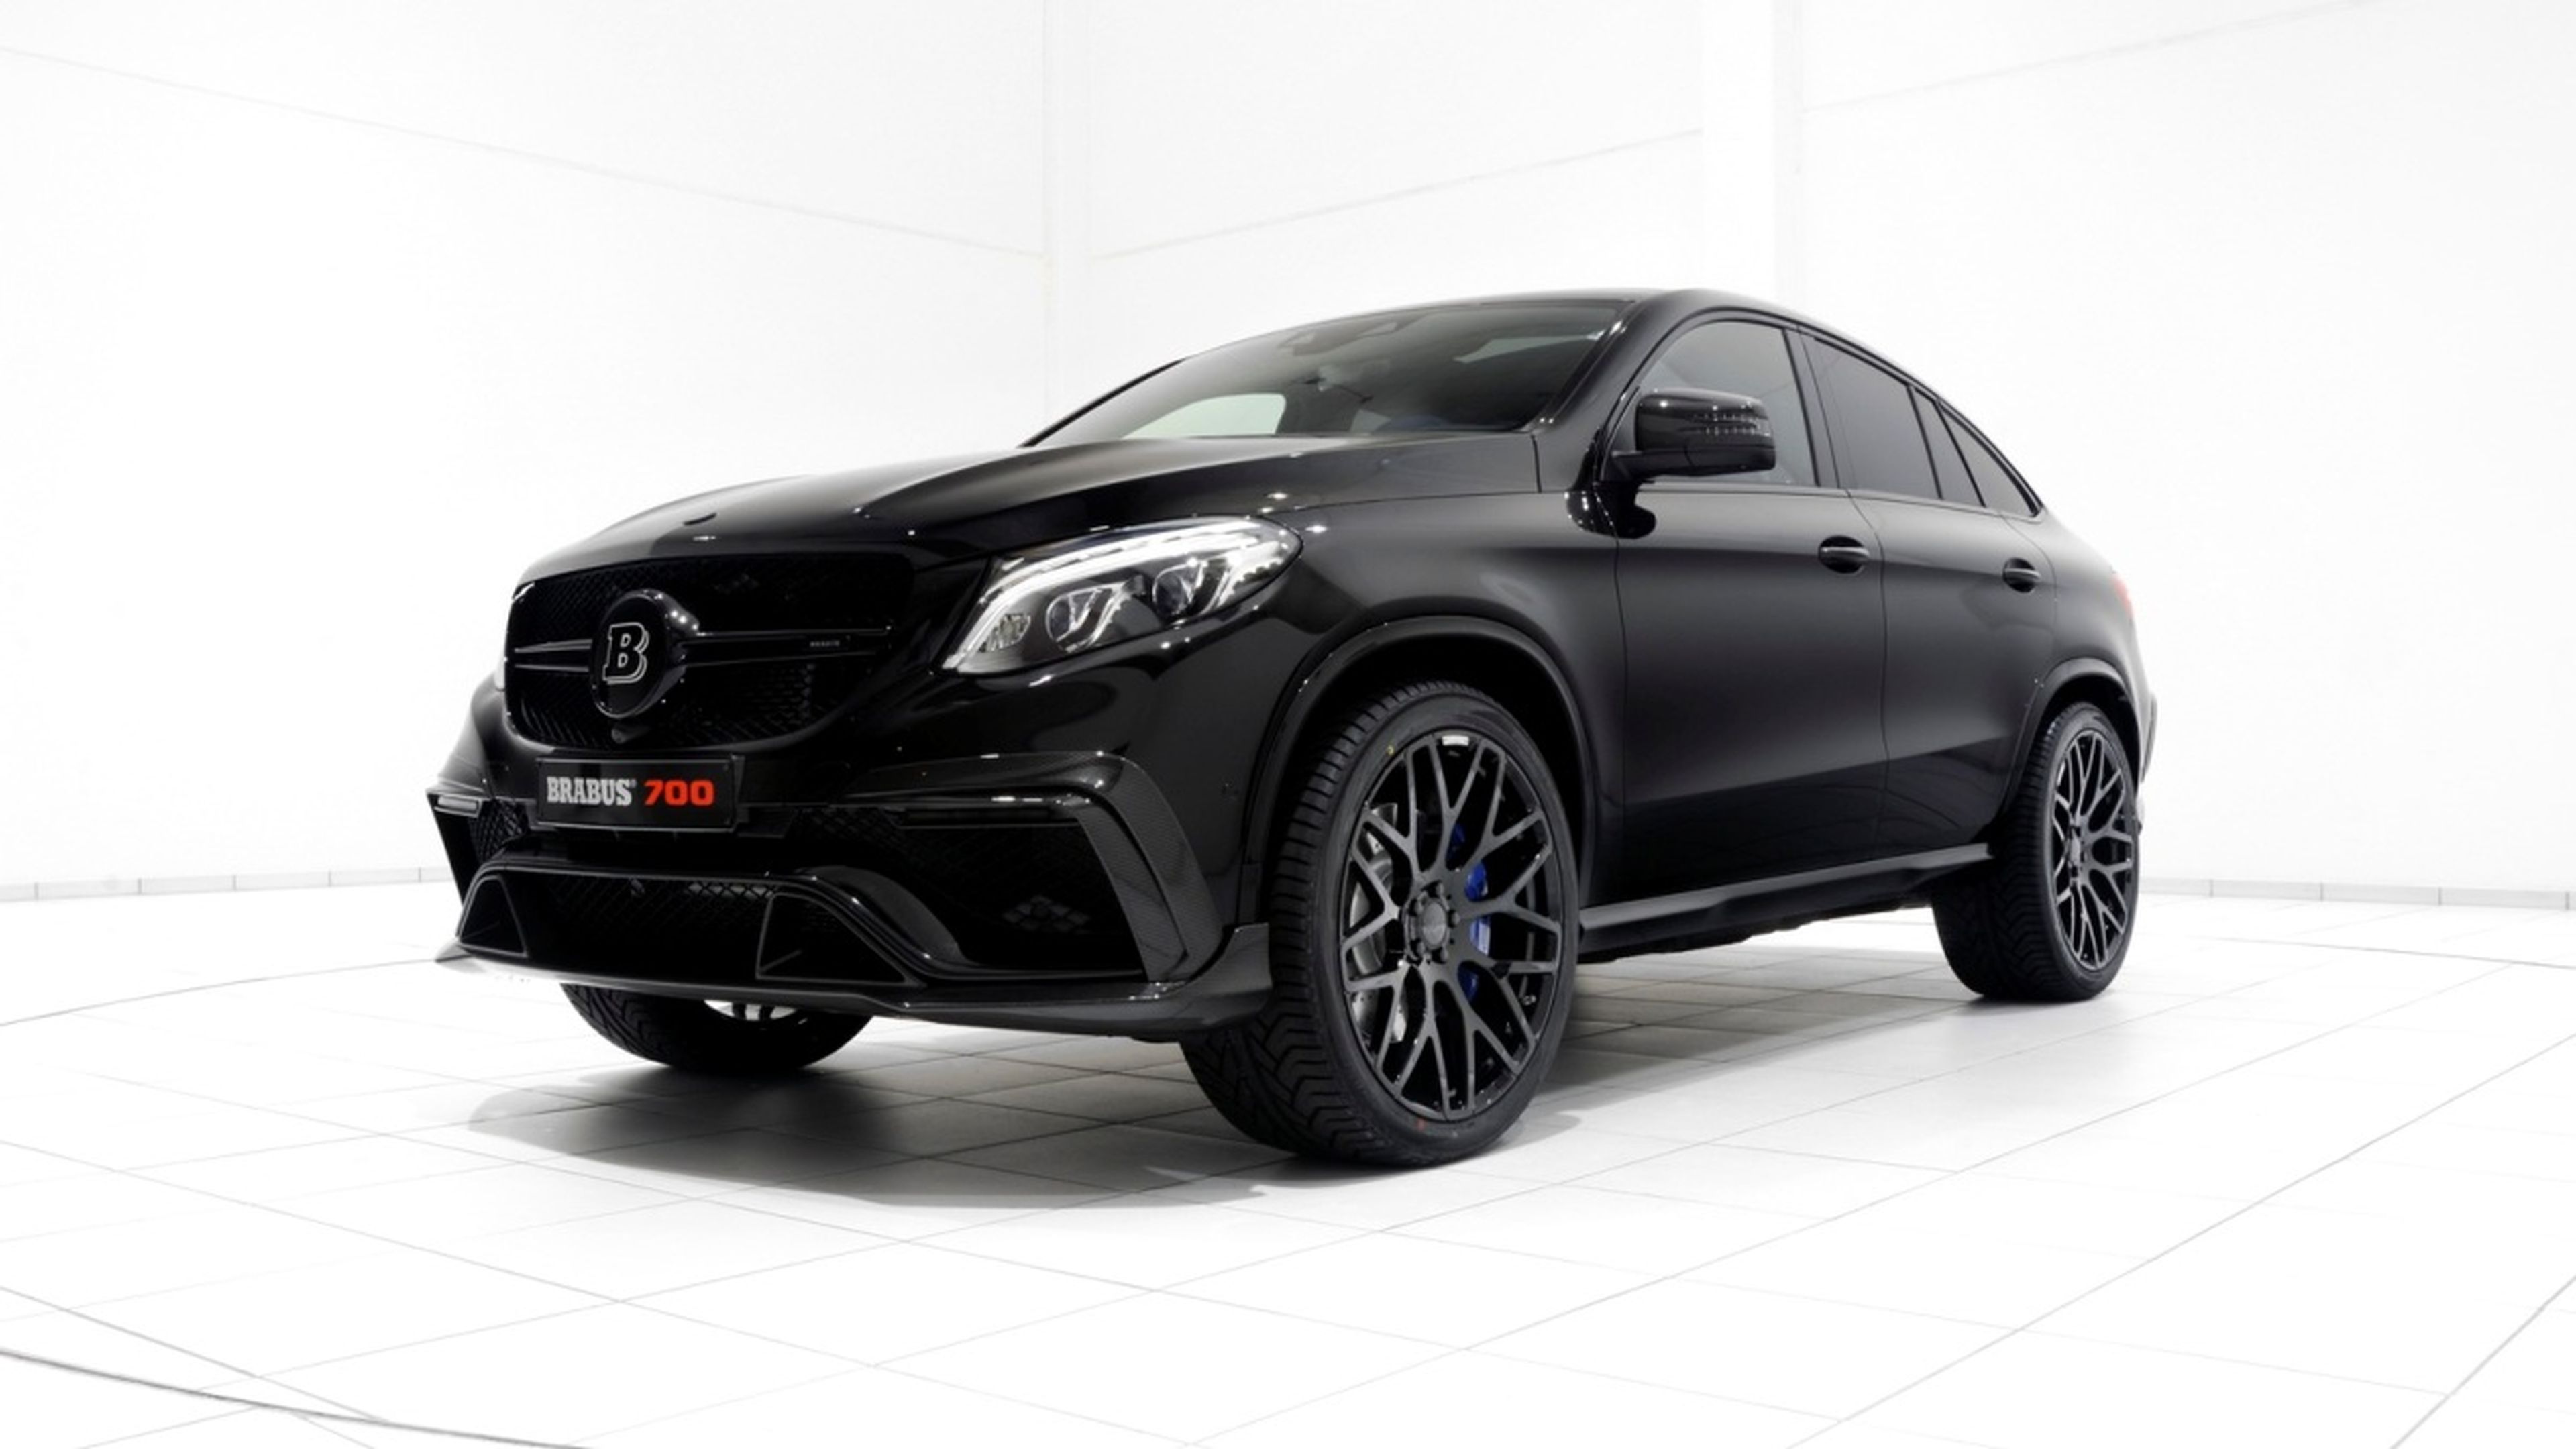 Brabus Mercedes-AMG GLE 63 S Coupé frontal